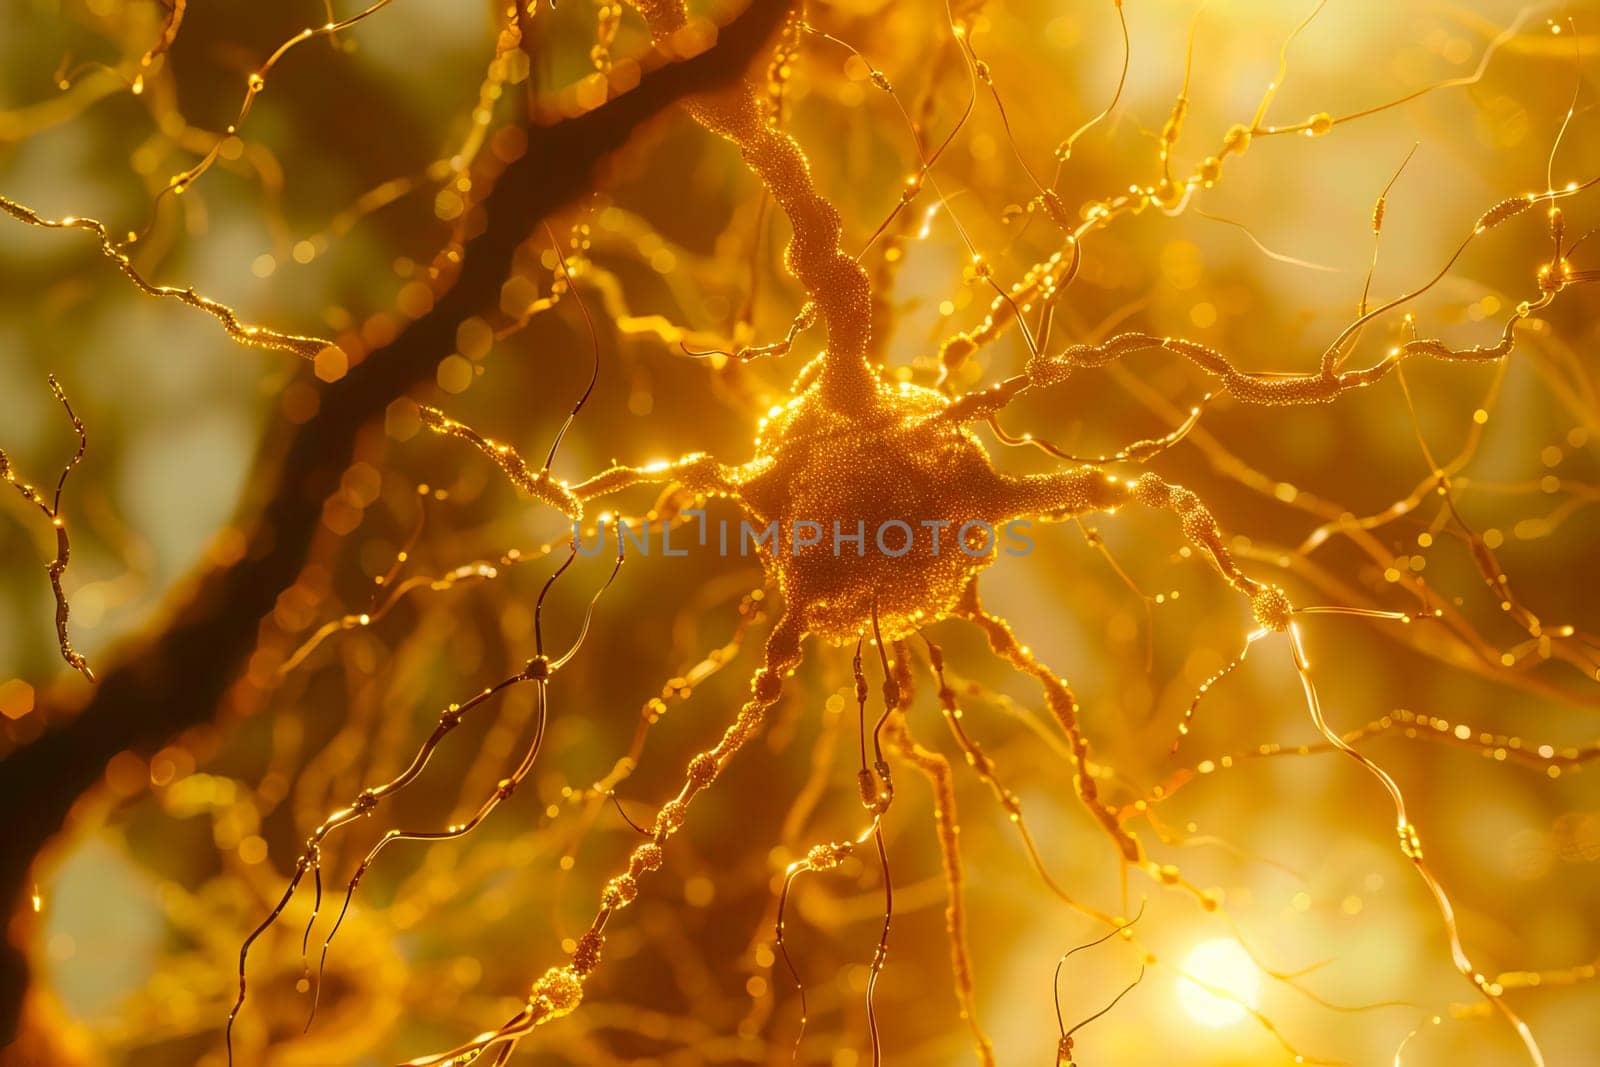 Neurons connecting through synapses with bursts of electrical activity.